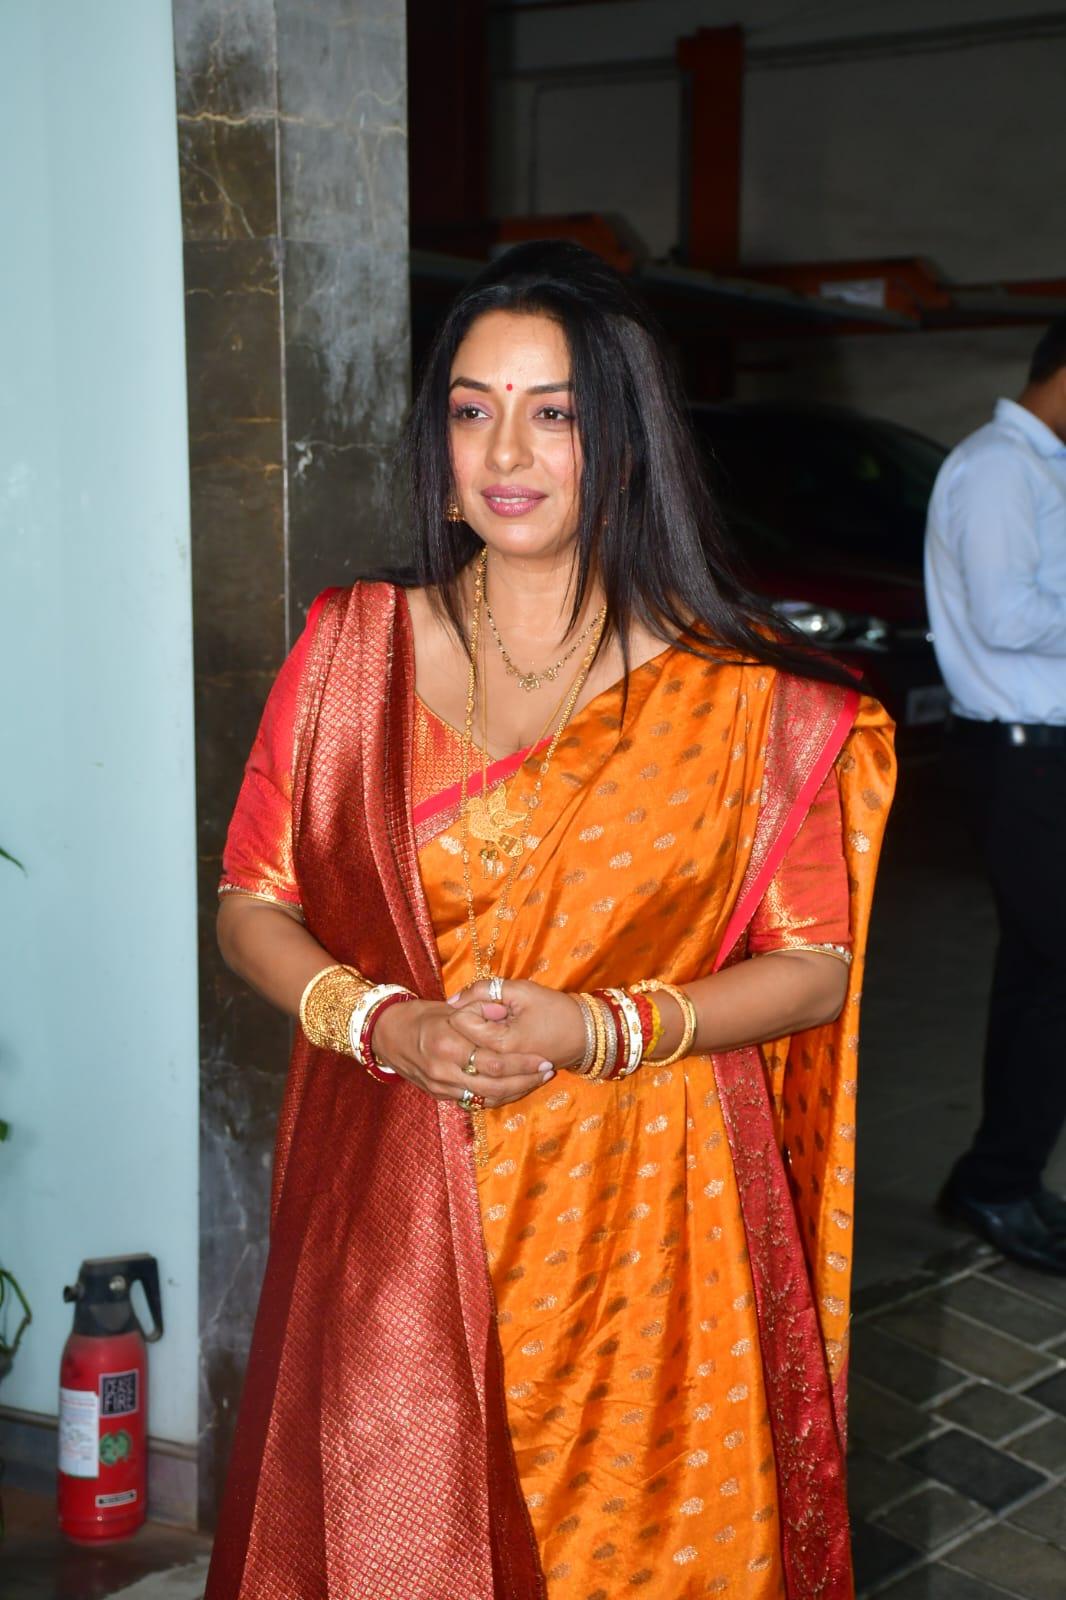 Rupali Ganguly was spotted at Anurag Basu's residence for his Saraswati Puja function. The 'Anupamaa' fame looked absolutely perfect